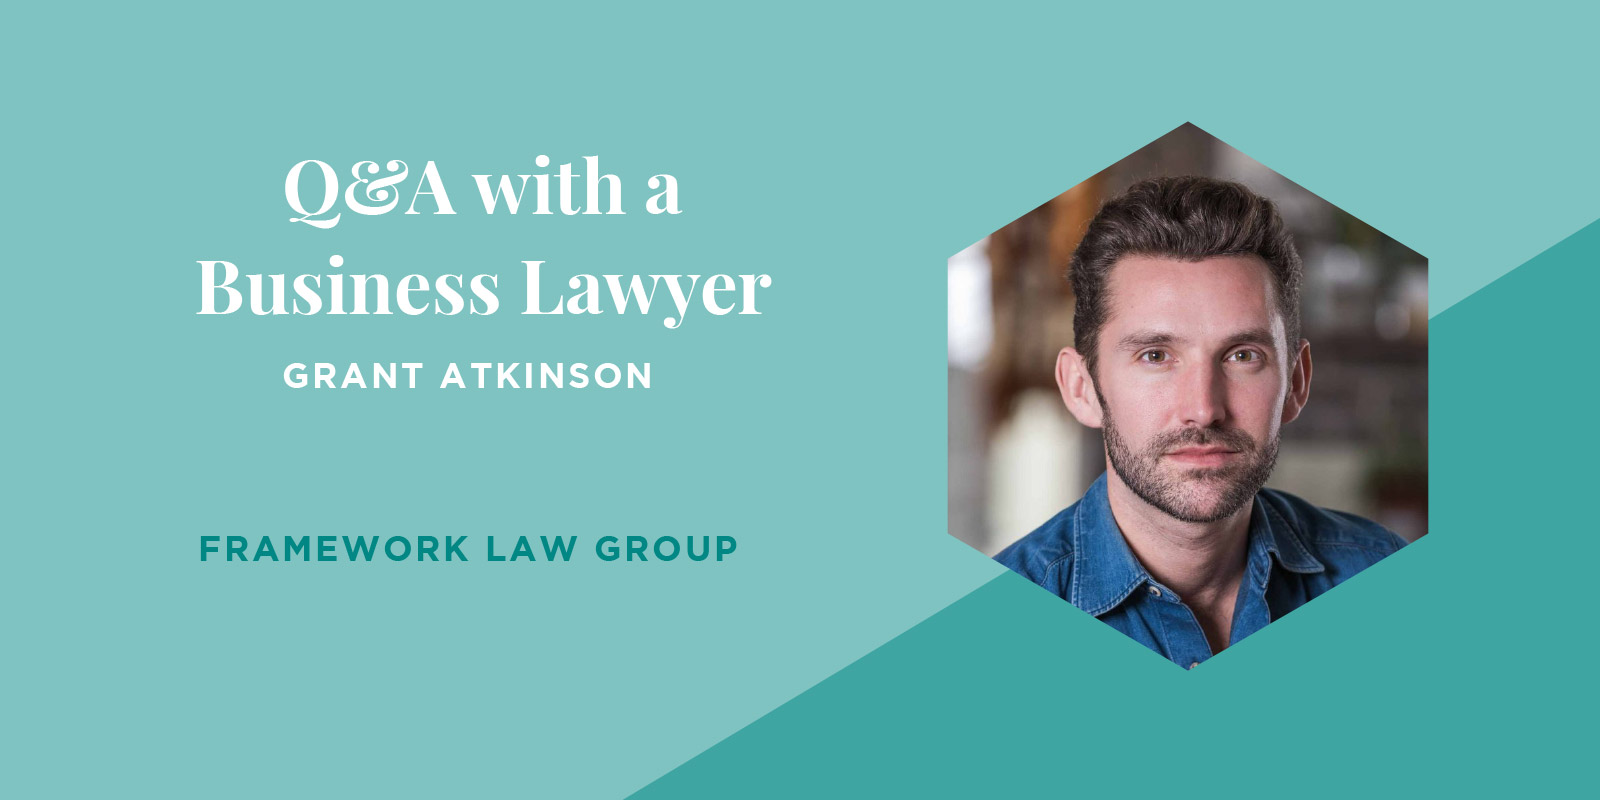 Q&A with business lawyer Grant Atkinson from Framework Law Group